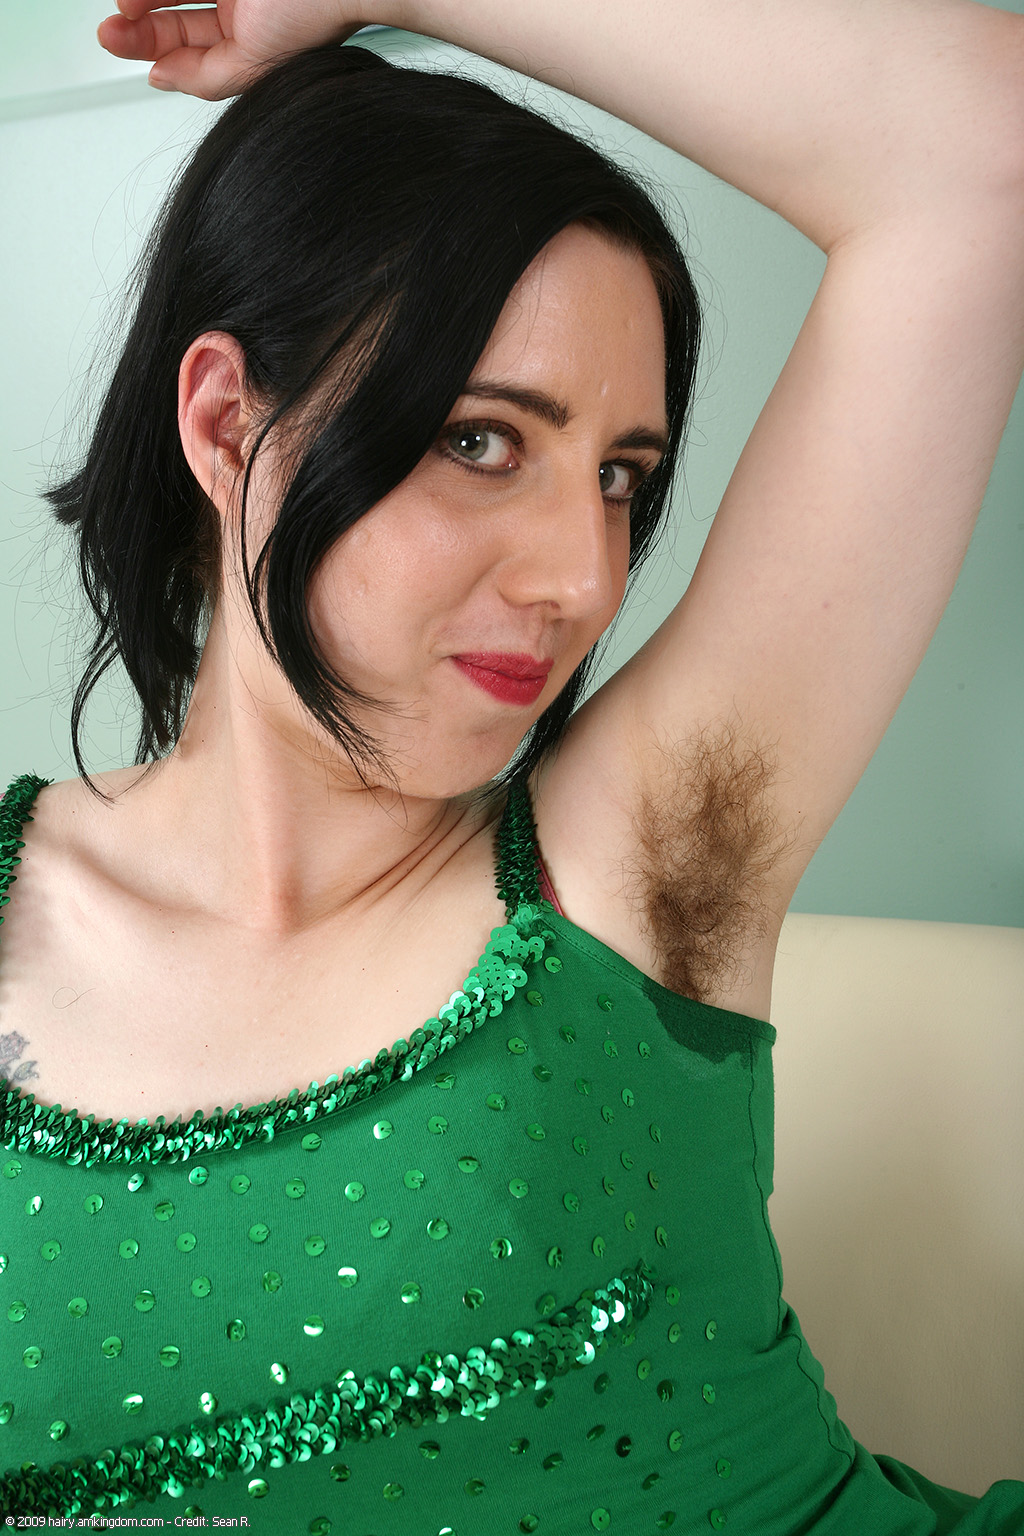 Doll Atk Natural Hairy « ATK Natural And Hairy « Free ATK Pictures @ Bravo ATK